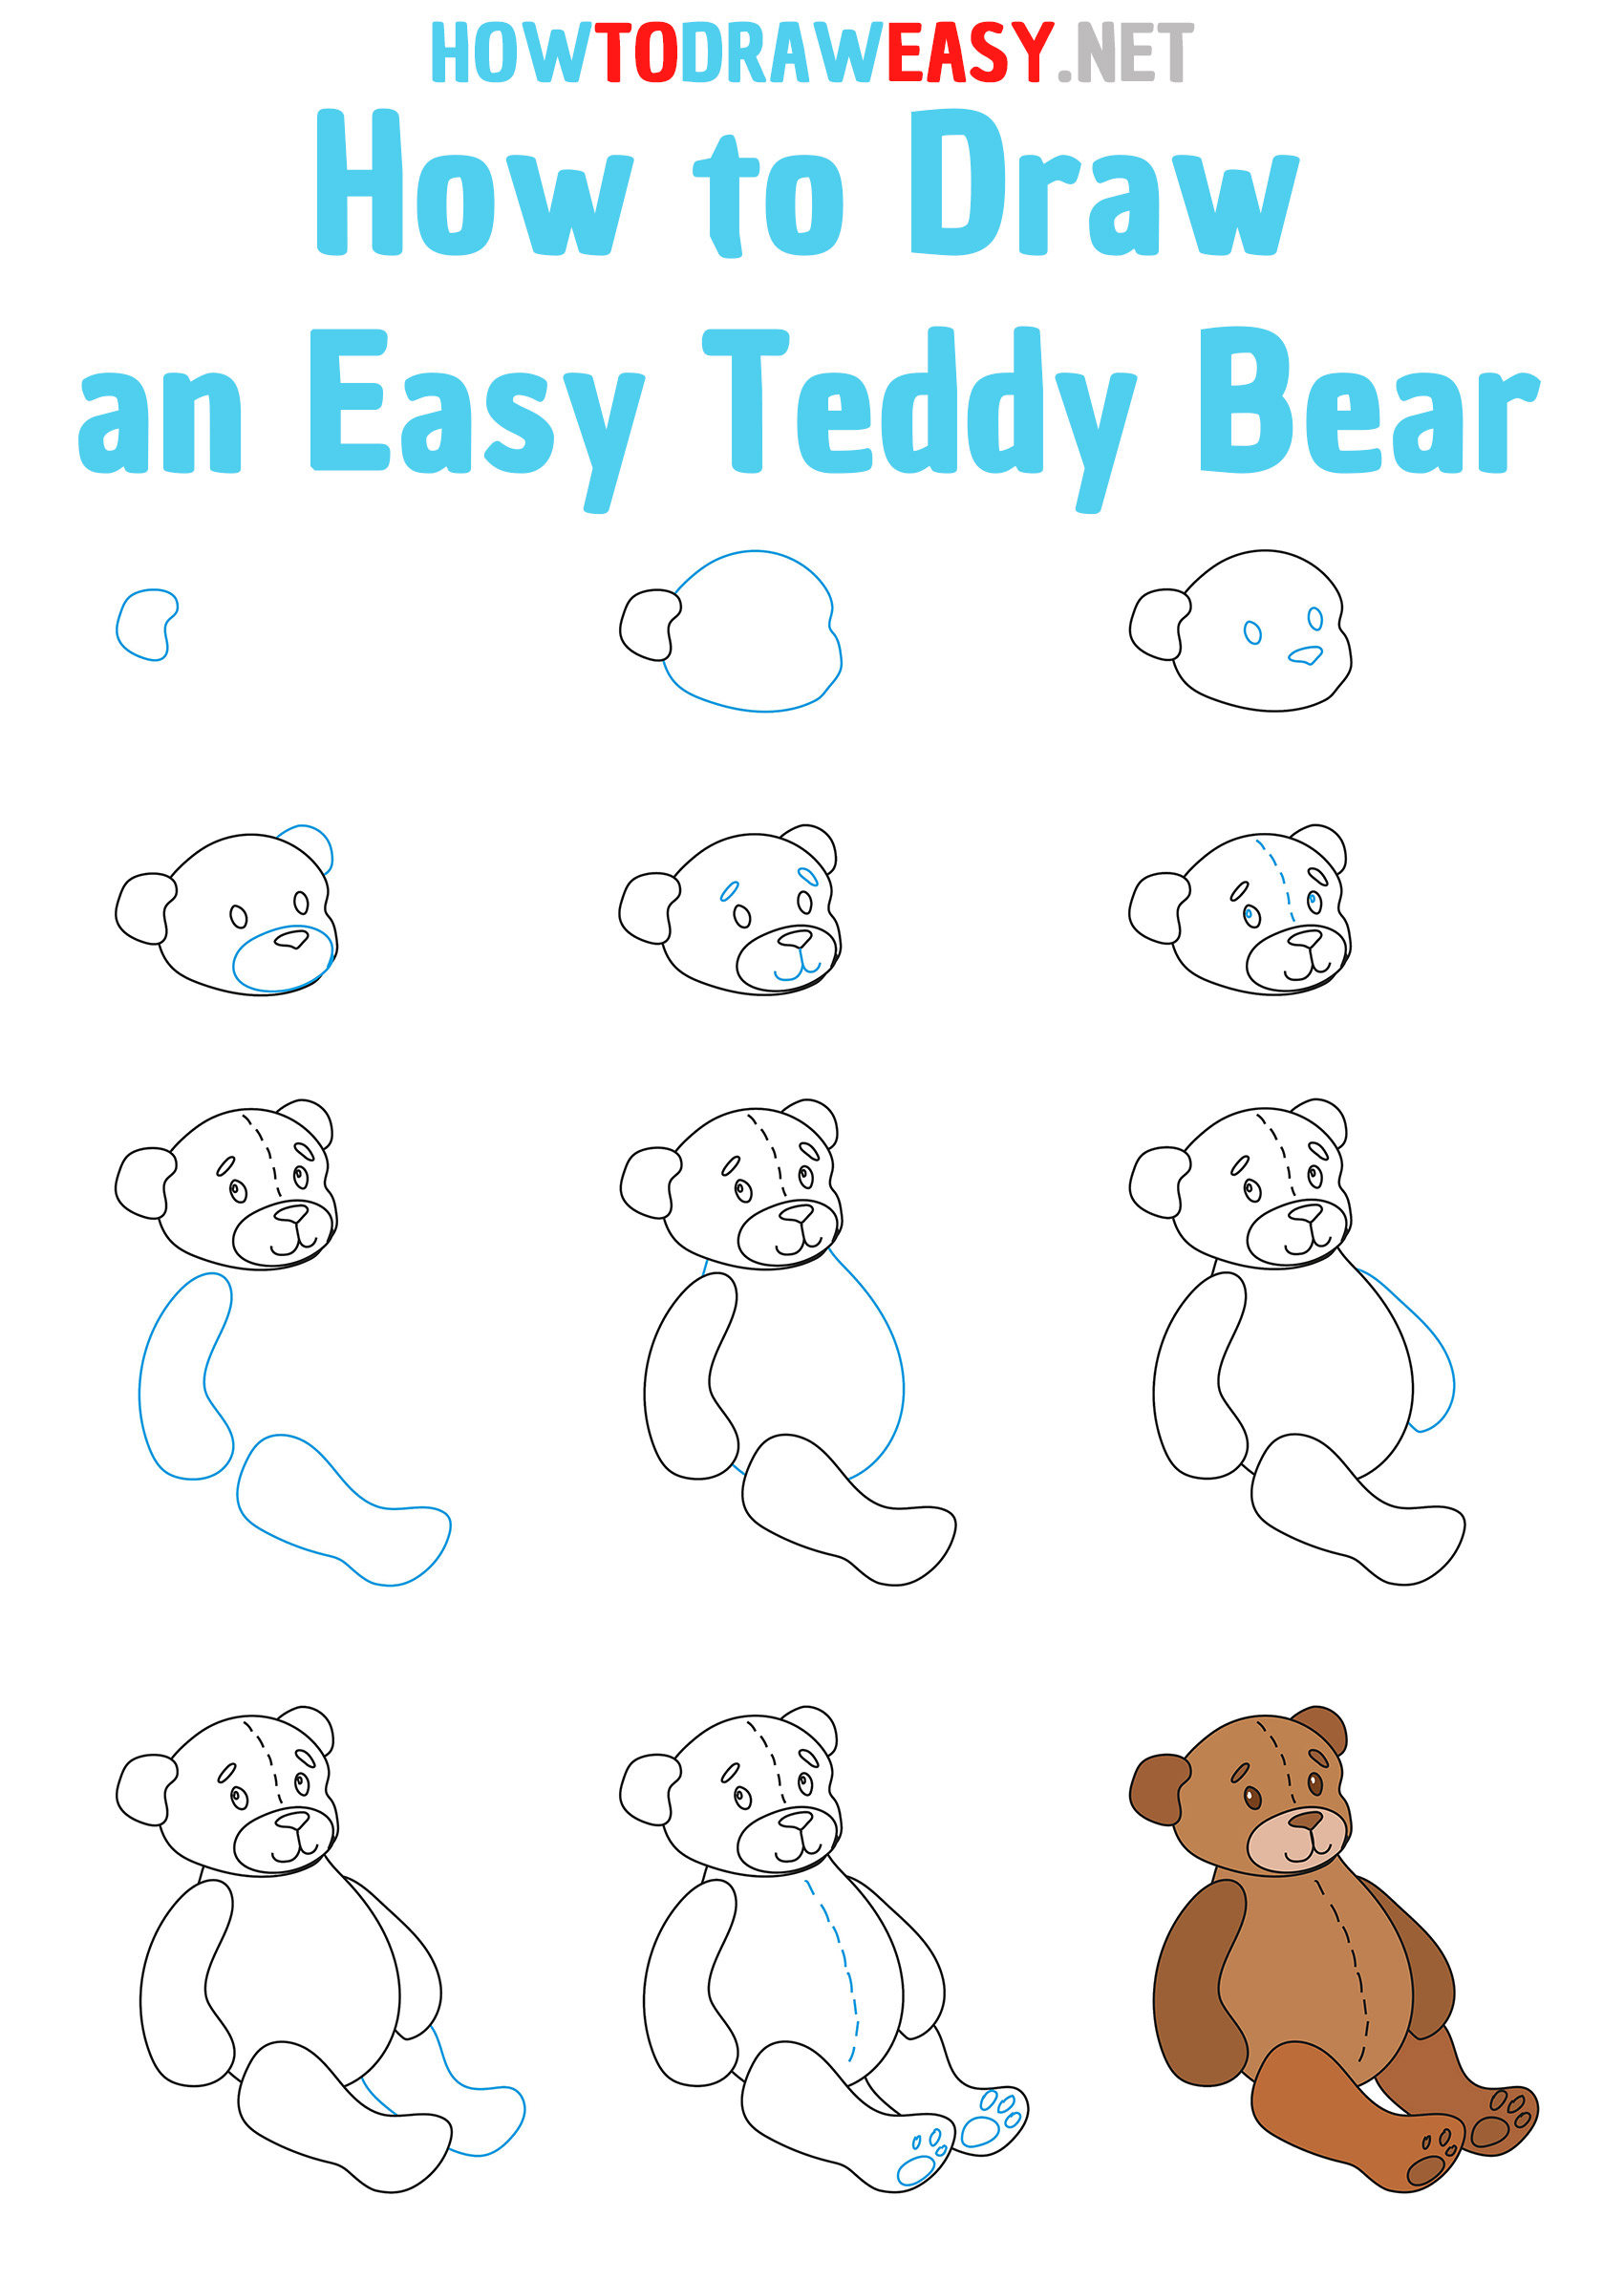 How to Draw a Teddy Bear Step by Step